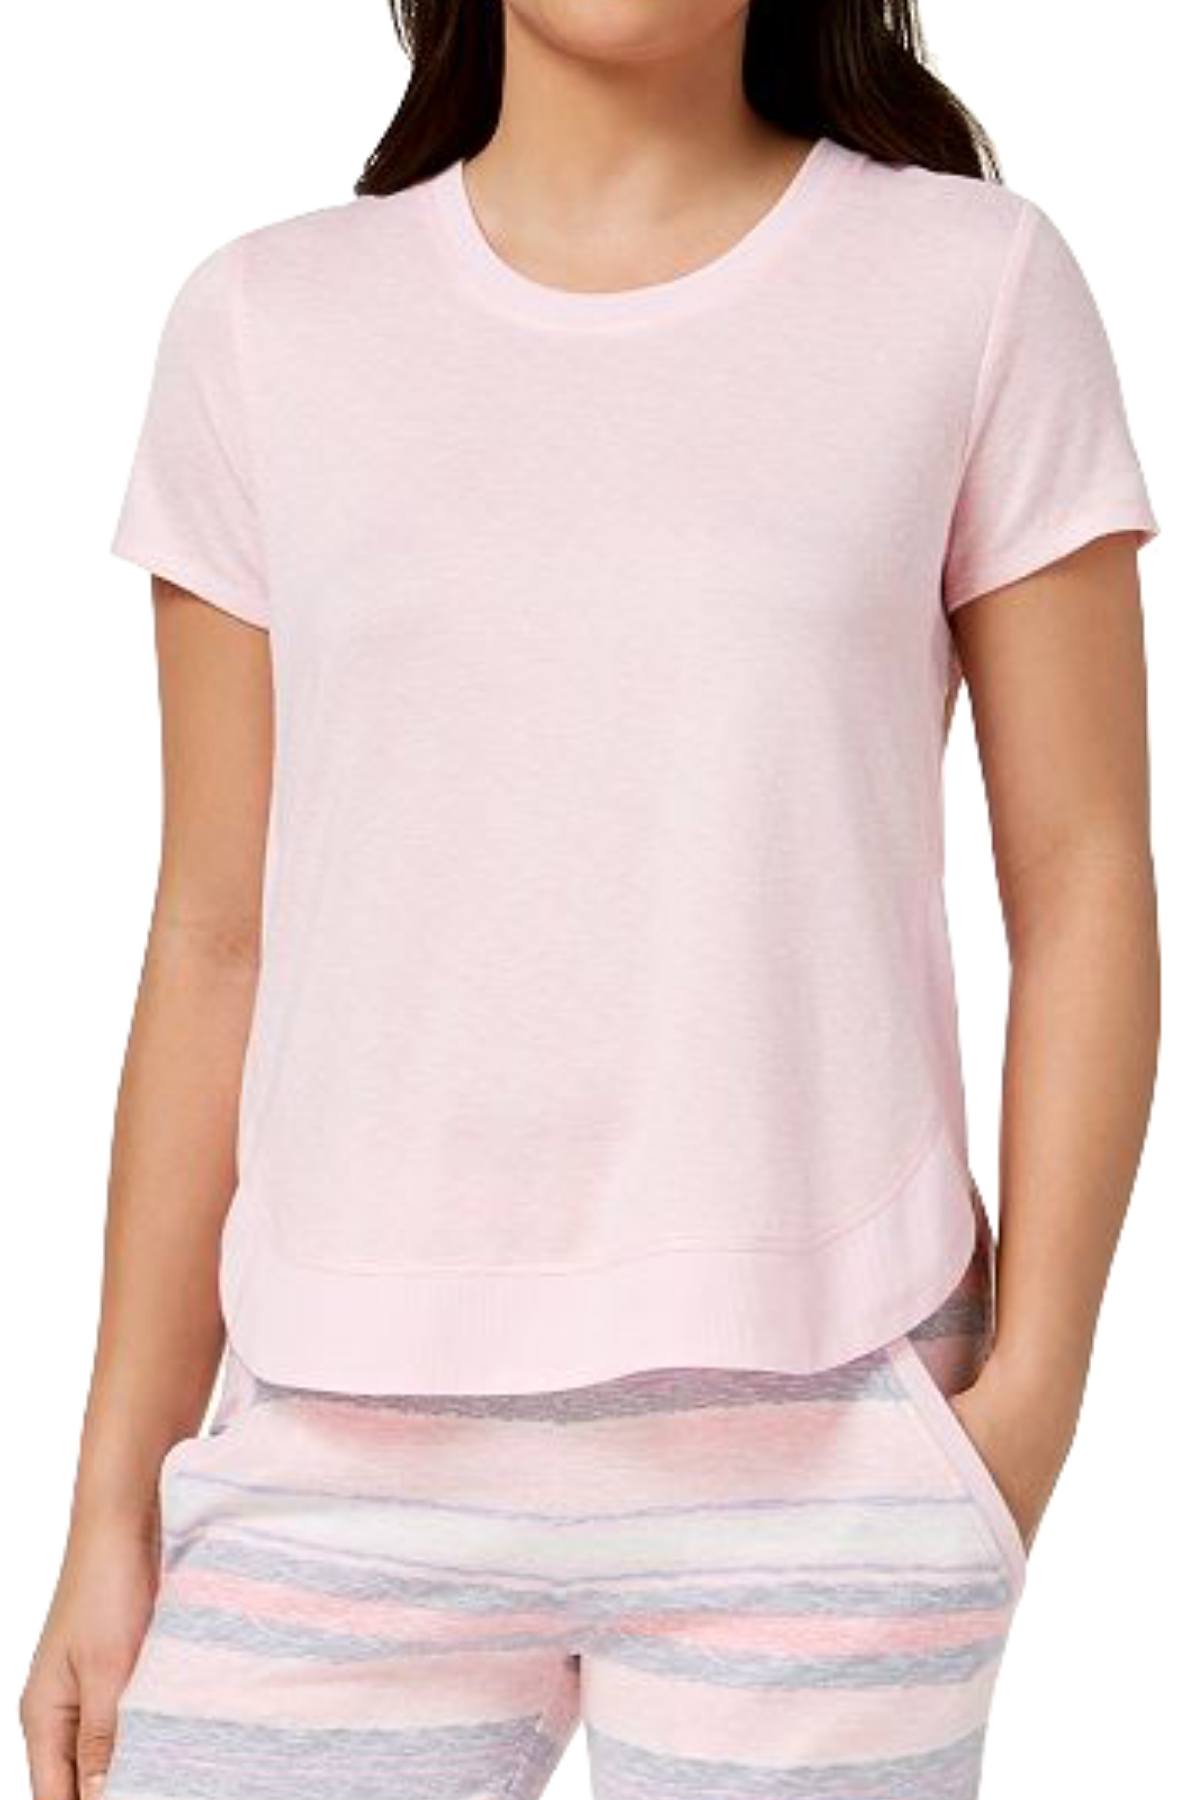 Ande Fairytale-Pink Space-Dye Whisperluxe Ribbed-Hem Lounge Top